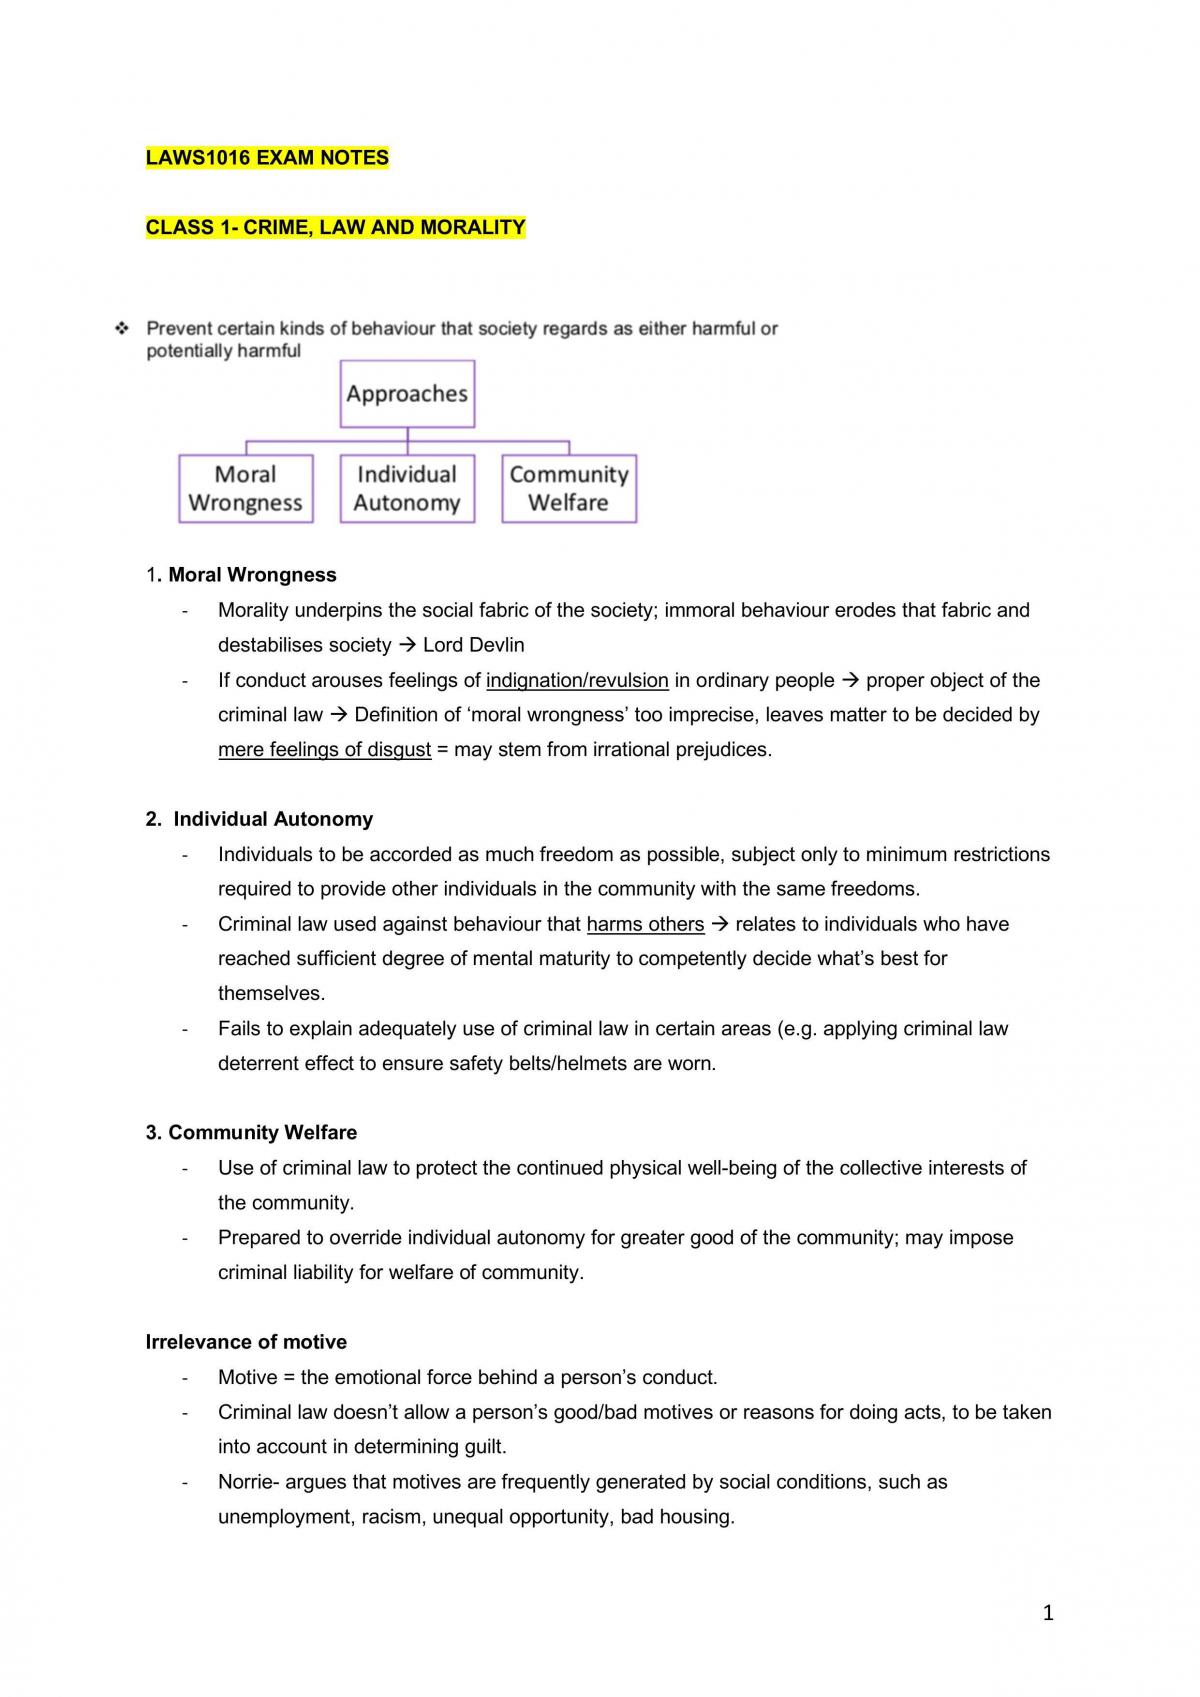 LAWS1016 Criminal Law Notes and Scaffolds - Page 1